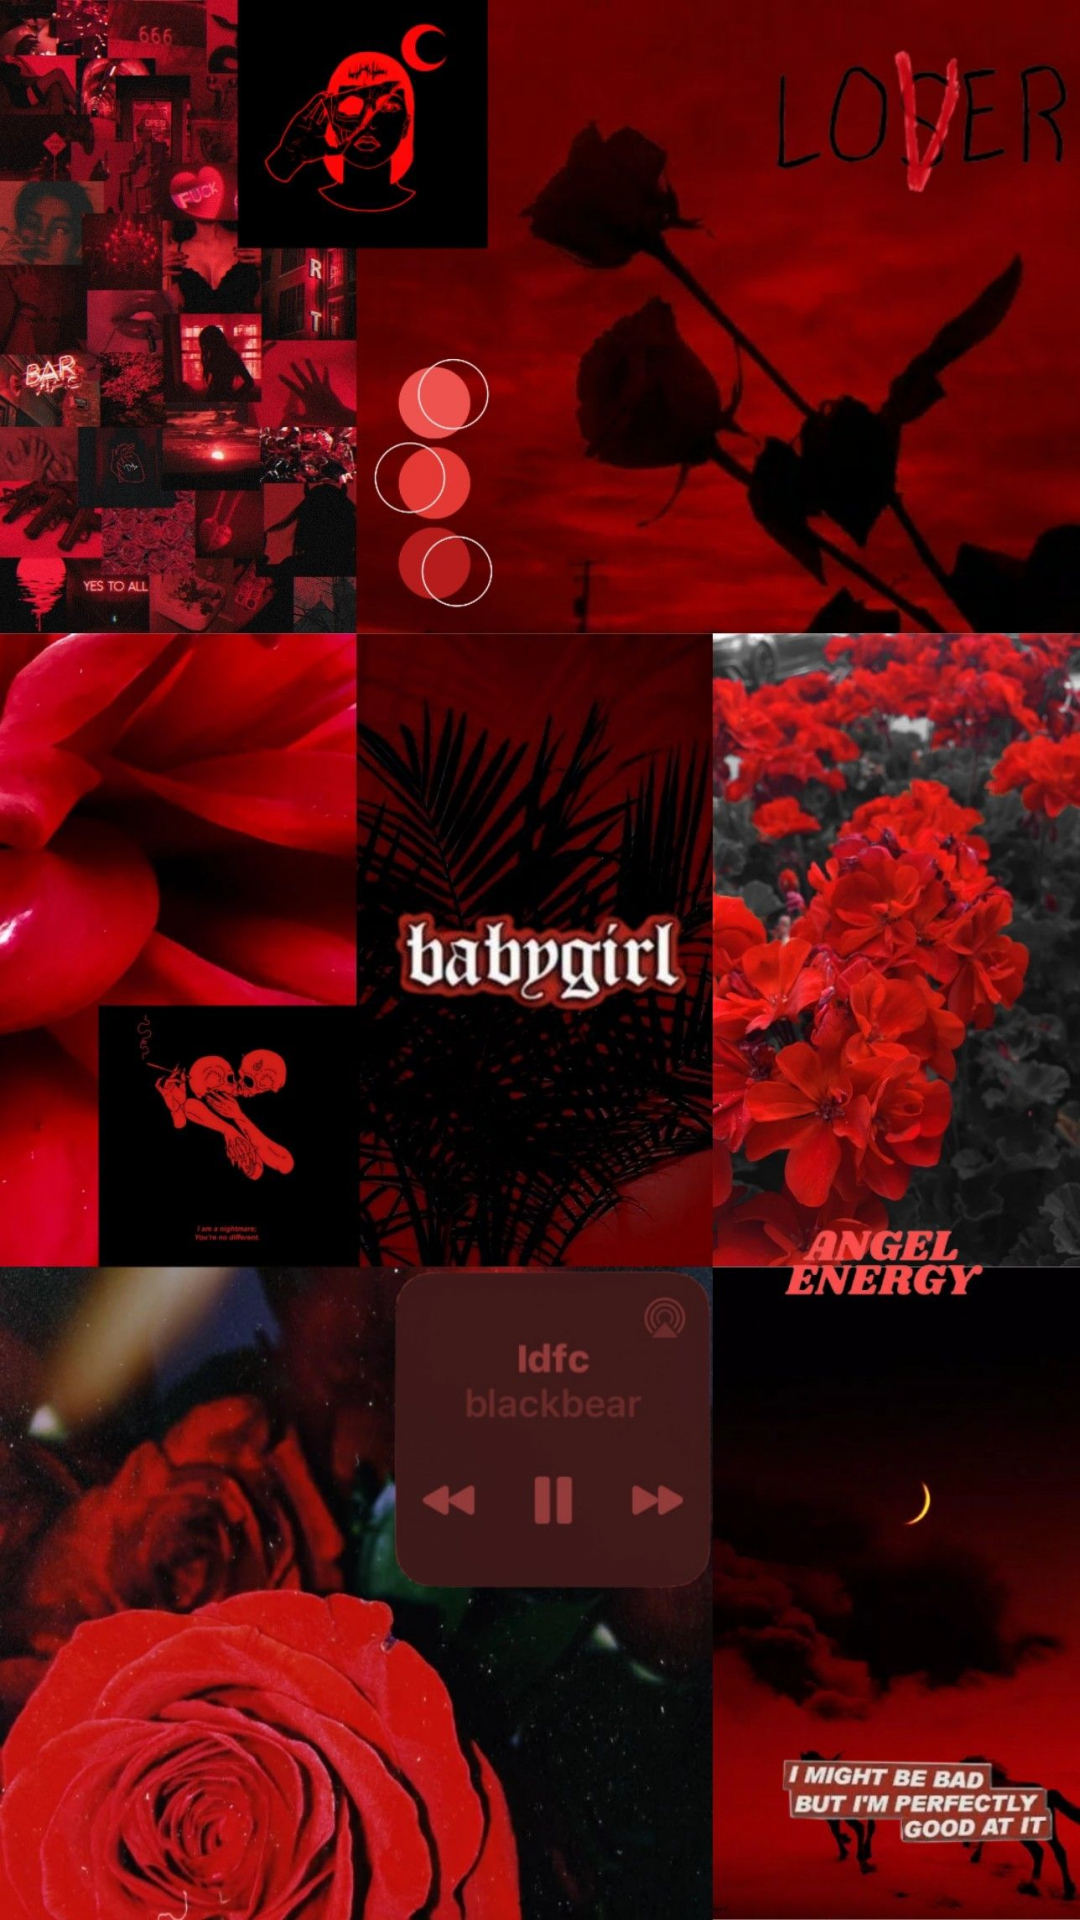 Free download Red and black aesthetic wallpaper in 2020 iPhone wallpaper [1288x2289] for your Desktop, Mobile & Tablet. Explore Aesthetic Red Wallpaper. Red Aesthetic Wallpaper, Red Roses Aesthetic Wallpaper, Aesthetic Wallpaper